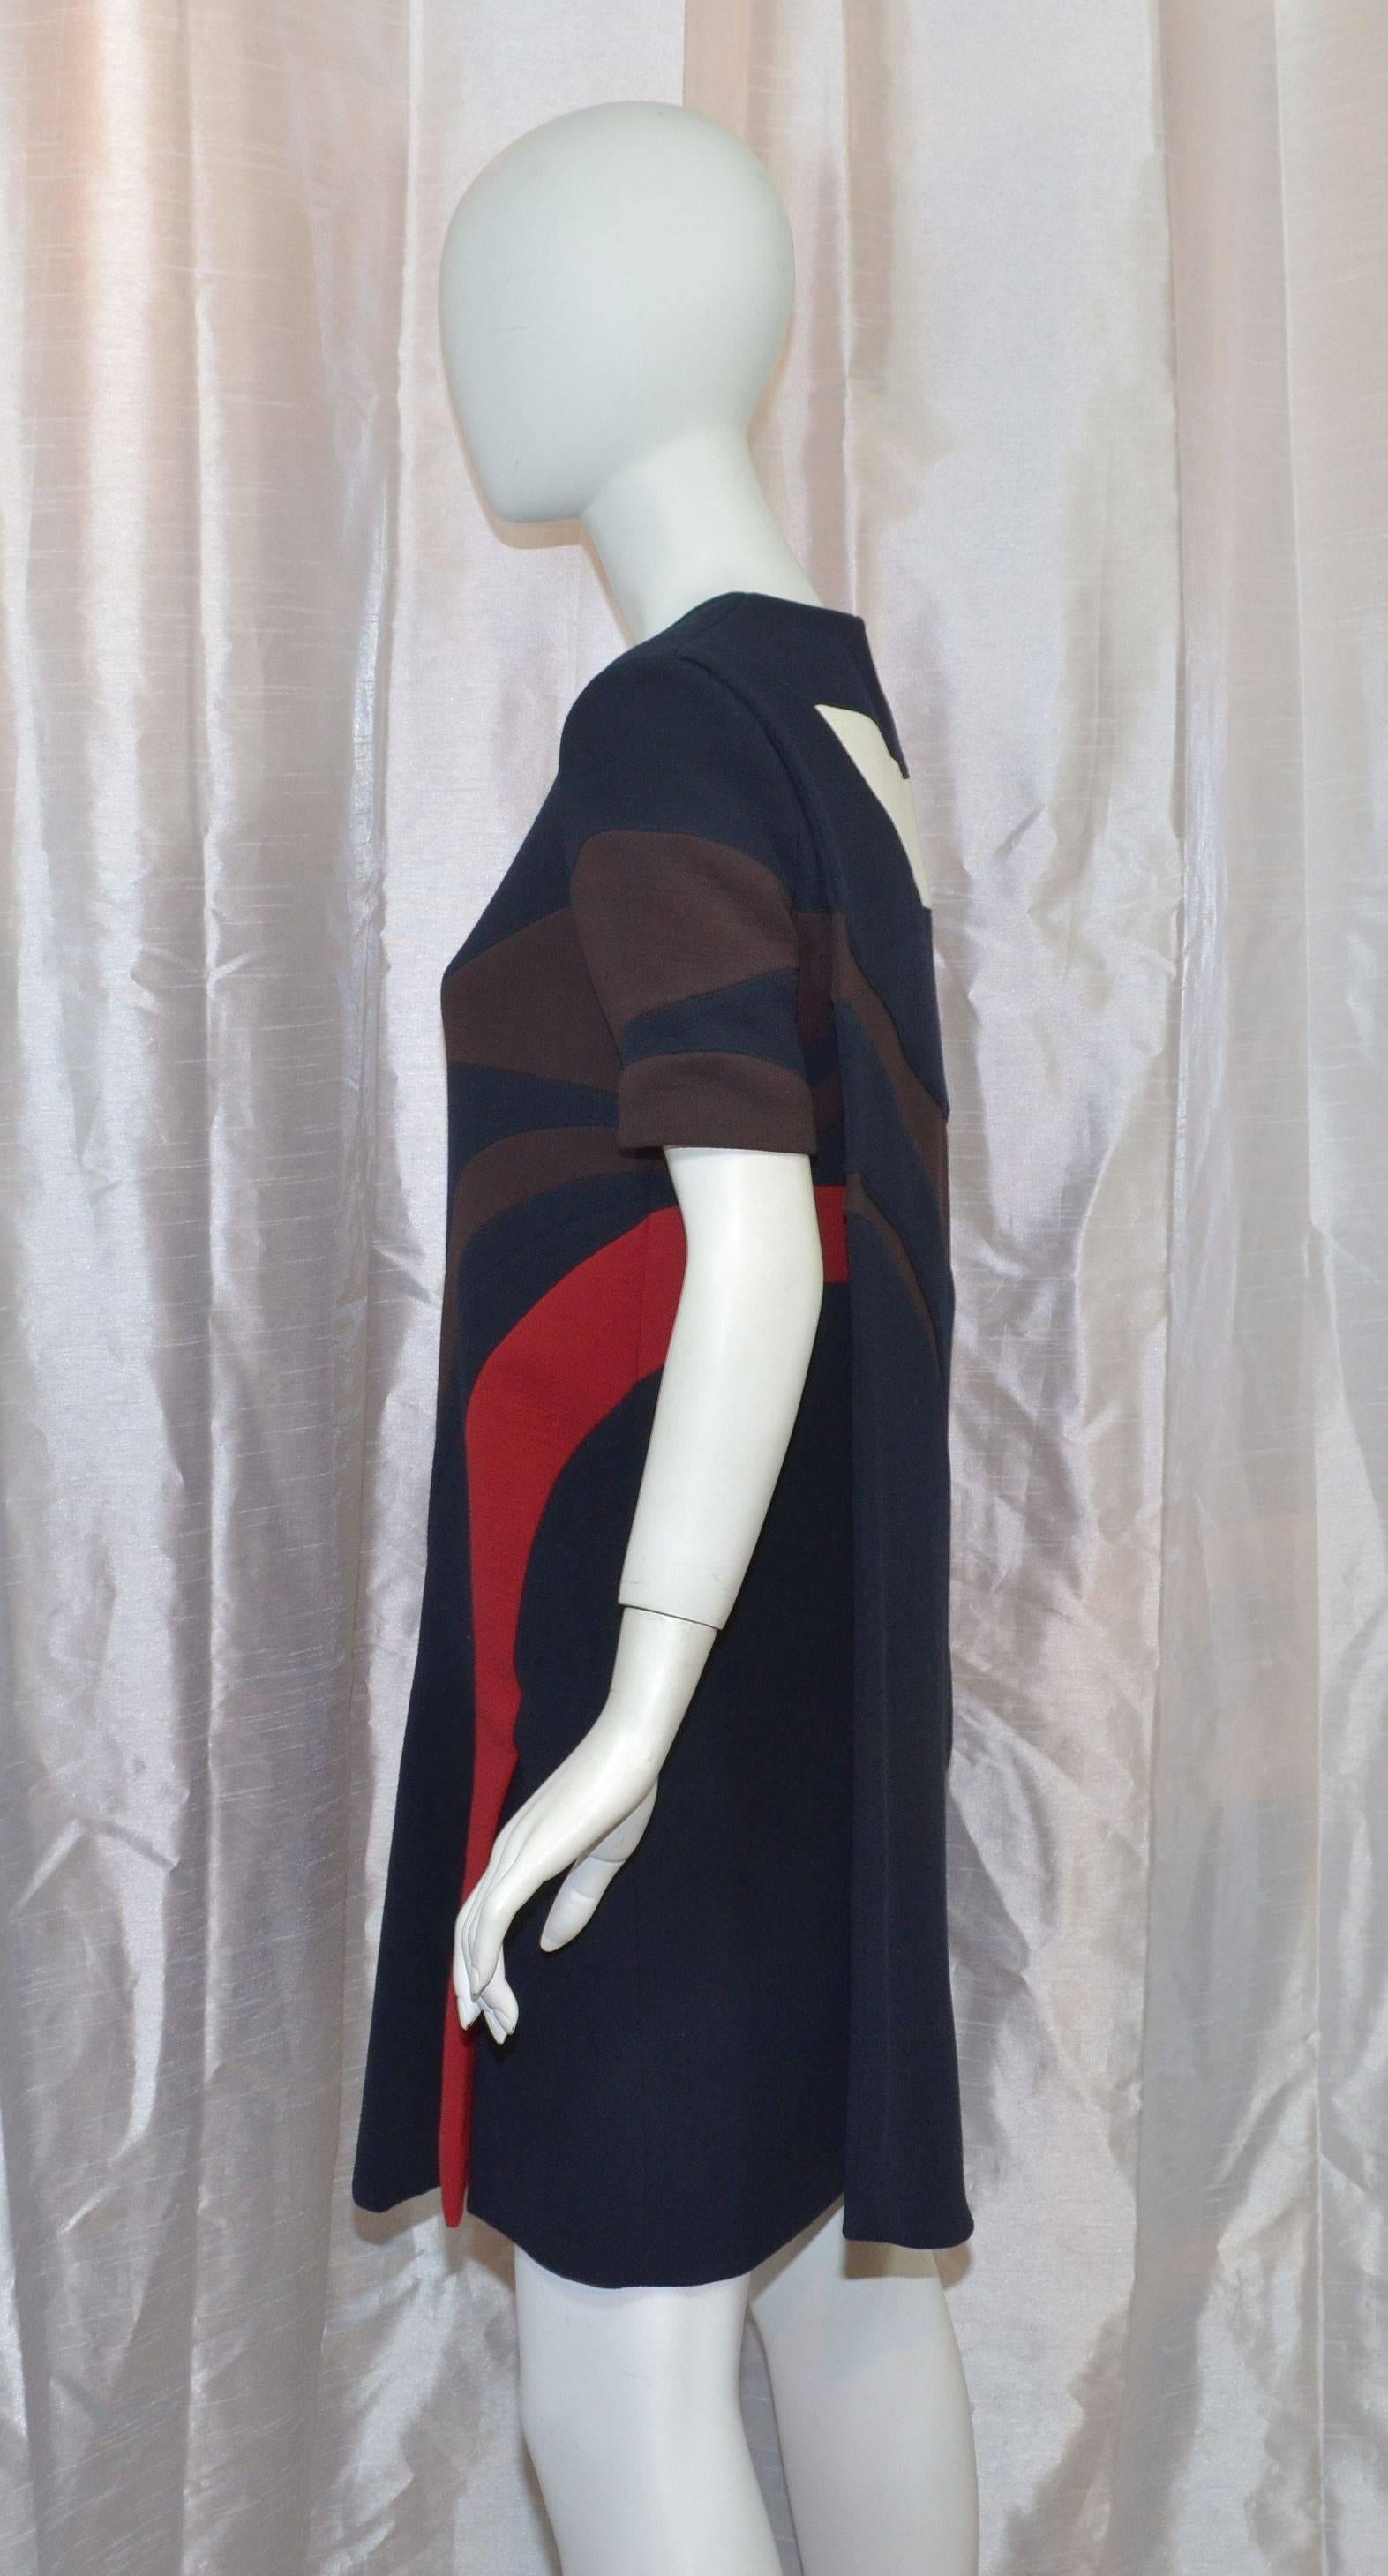 Christian Dior structured wool dress featured in navy blue with brown/red/cream patterning, double-layered back with a zipper and hook-and-eye fastening. Dress is fully lined. Original tags attached. Retail price 4k. 100% virgin wool, 100% silk